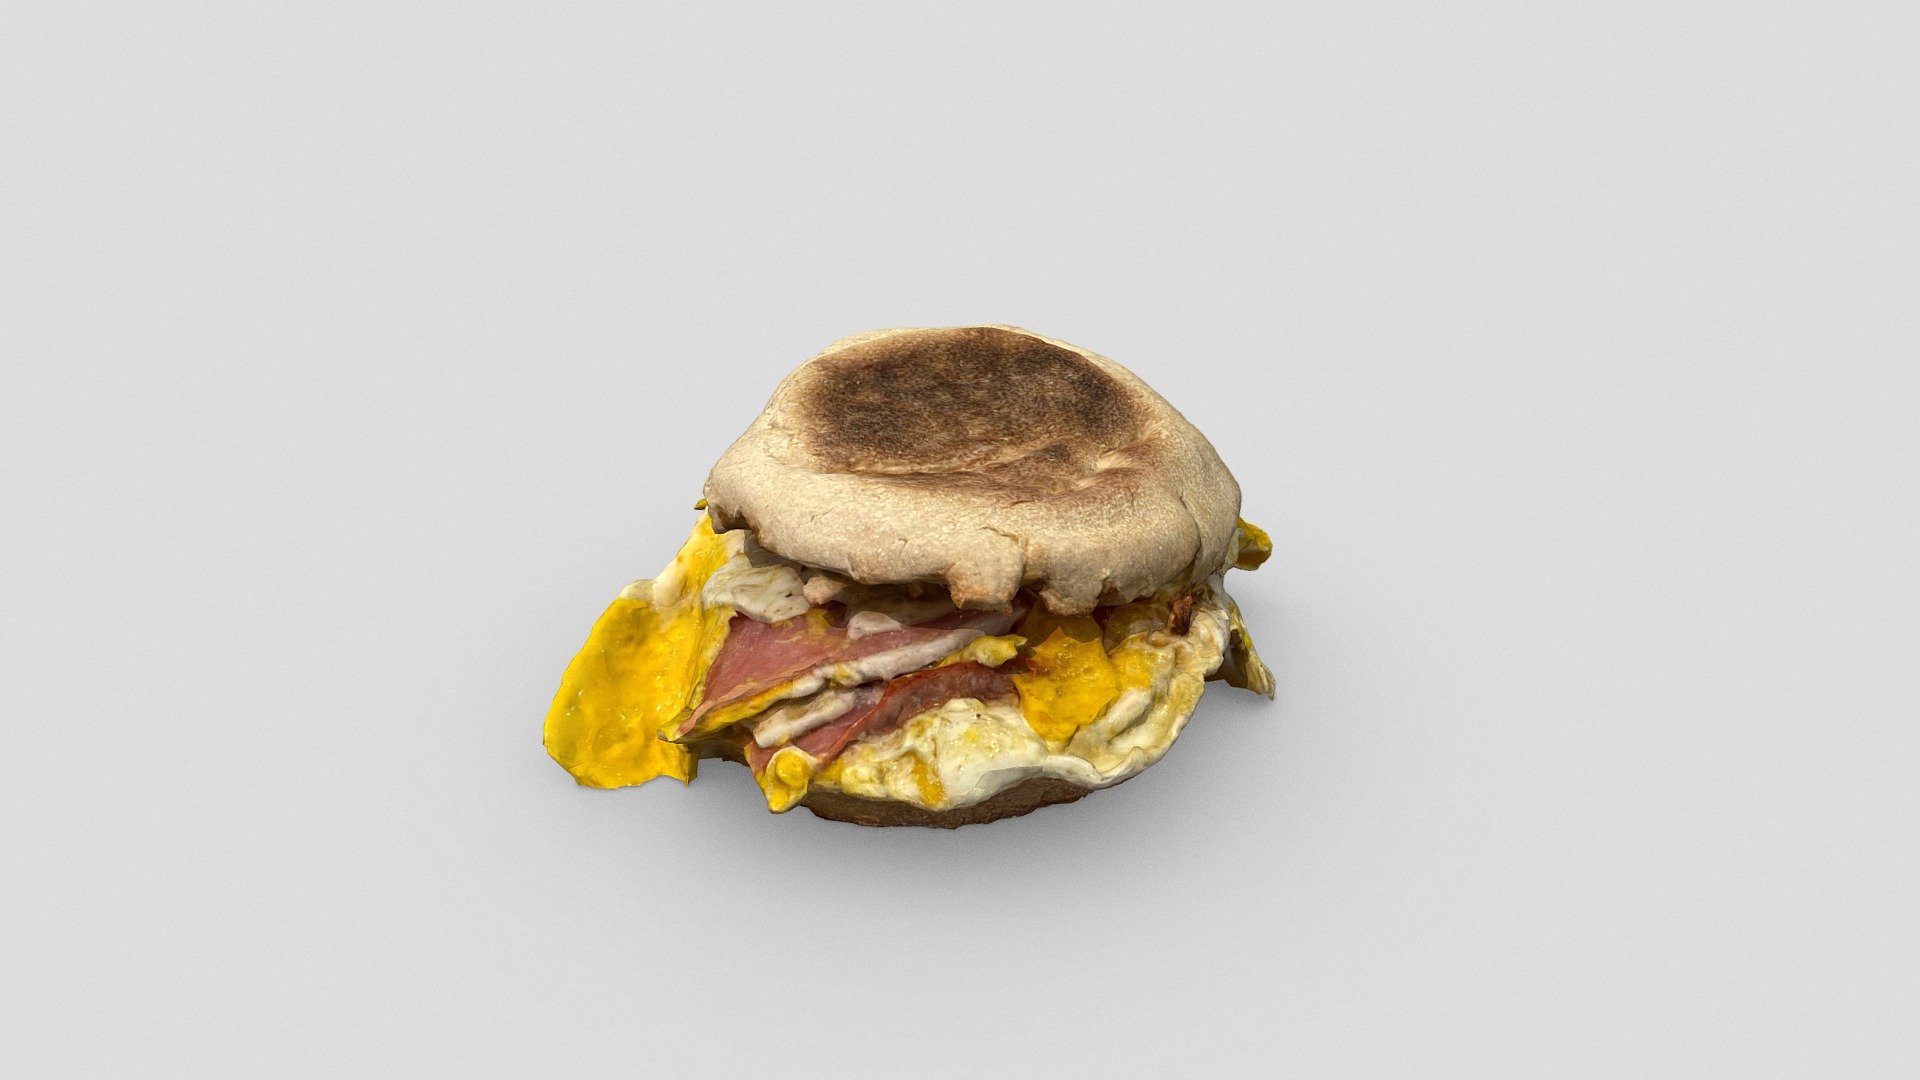 Use this 3d photogrammetry scan to get an a realistic view of how your architectural project would look for any client.

Celebrate any architectural project with a 3d scanned breakfast sandwich! With the Breakfast Sandwich you can create an idealized version of your space that really shows how people live in your buildings. It's always important for architects to explore different viewpoints and find new ways to improve interior spaces. Make breakfast part of your design 3d model